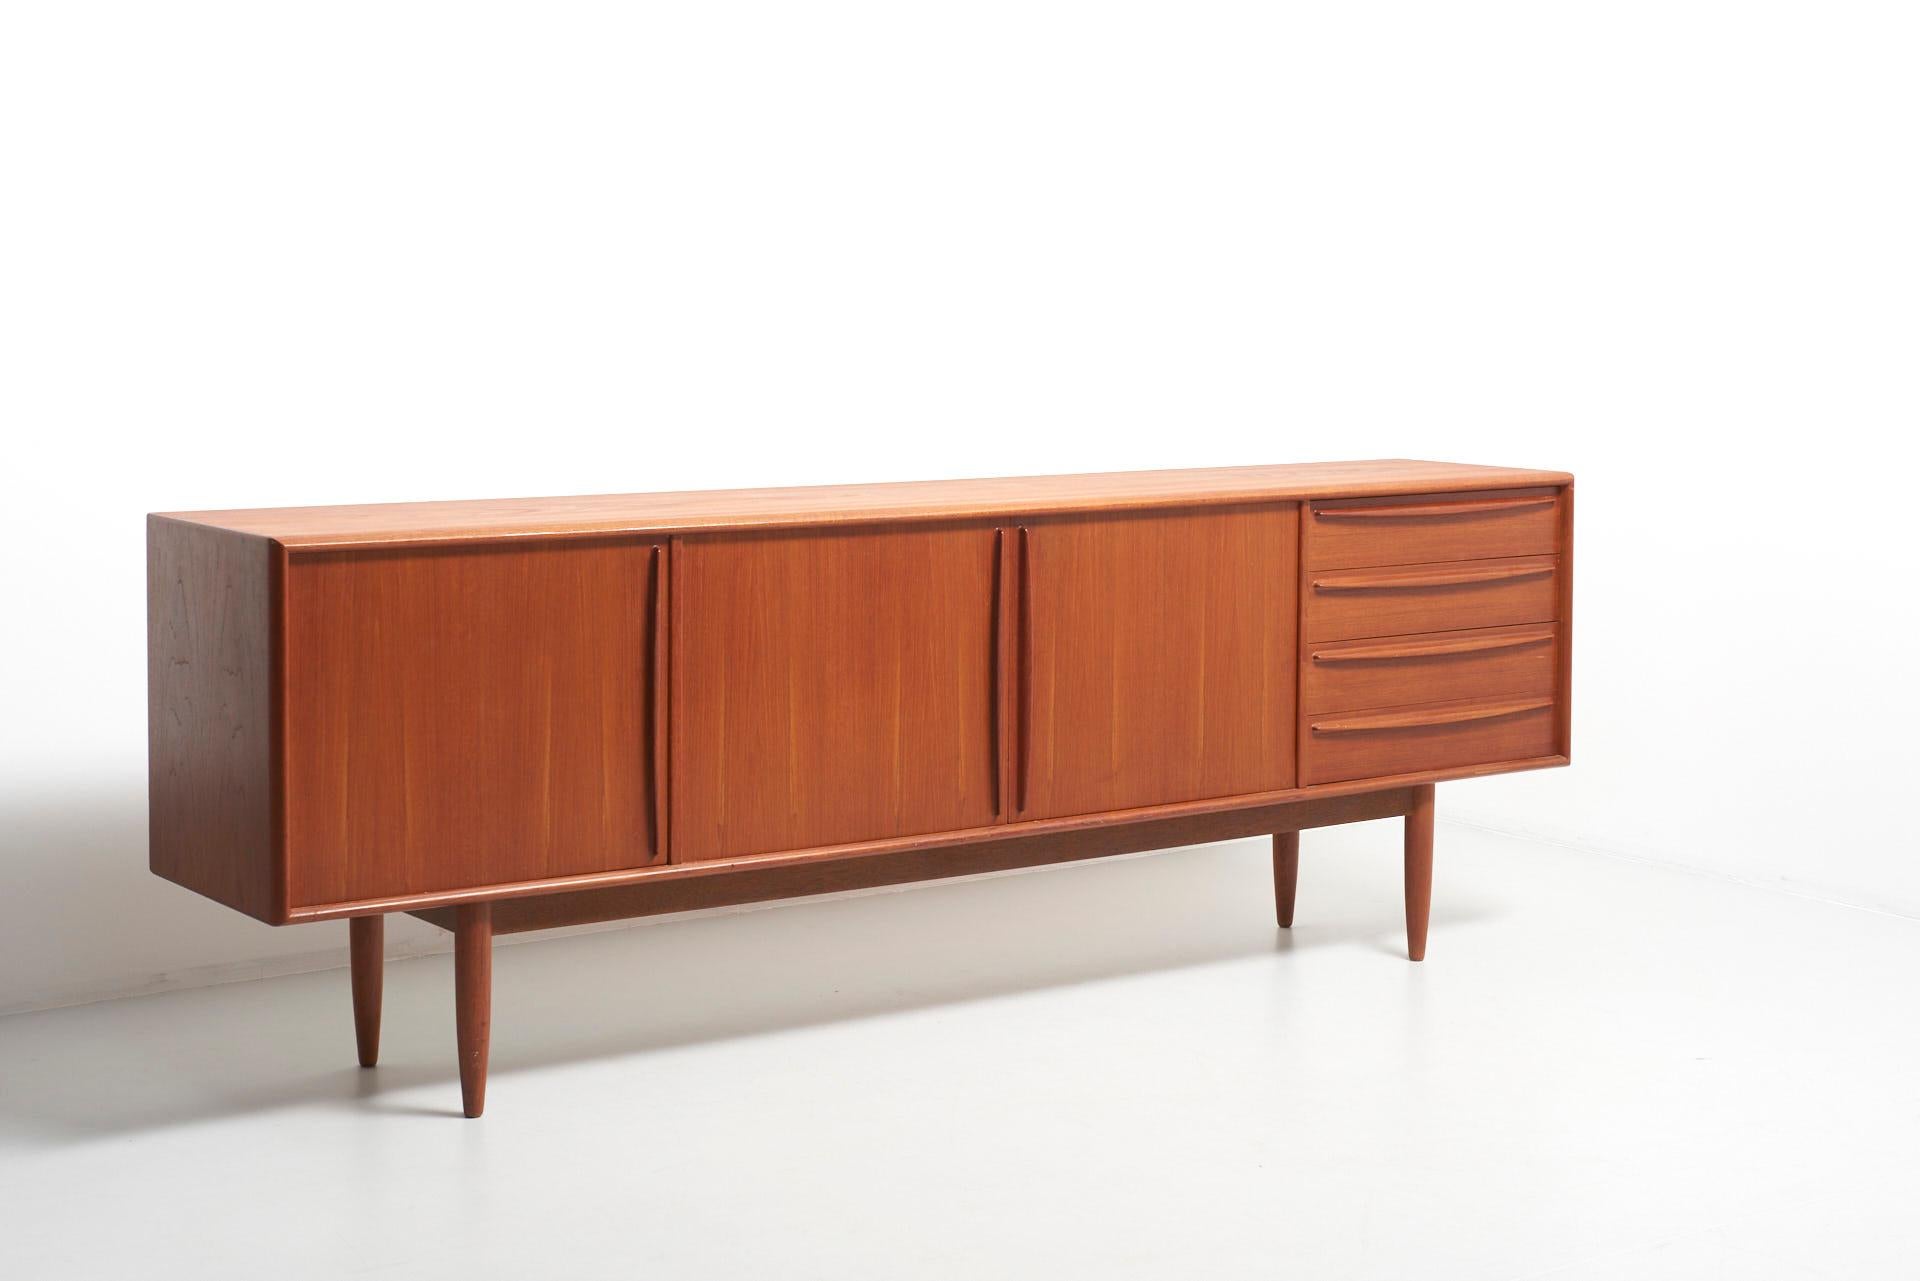 A sideboard in teak, with a bottle rack and 4 drawers. Made by HP Hansen in Denmark.